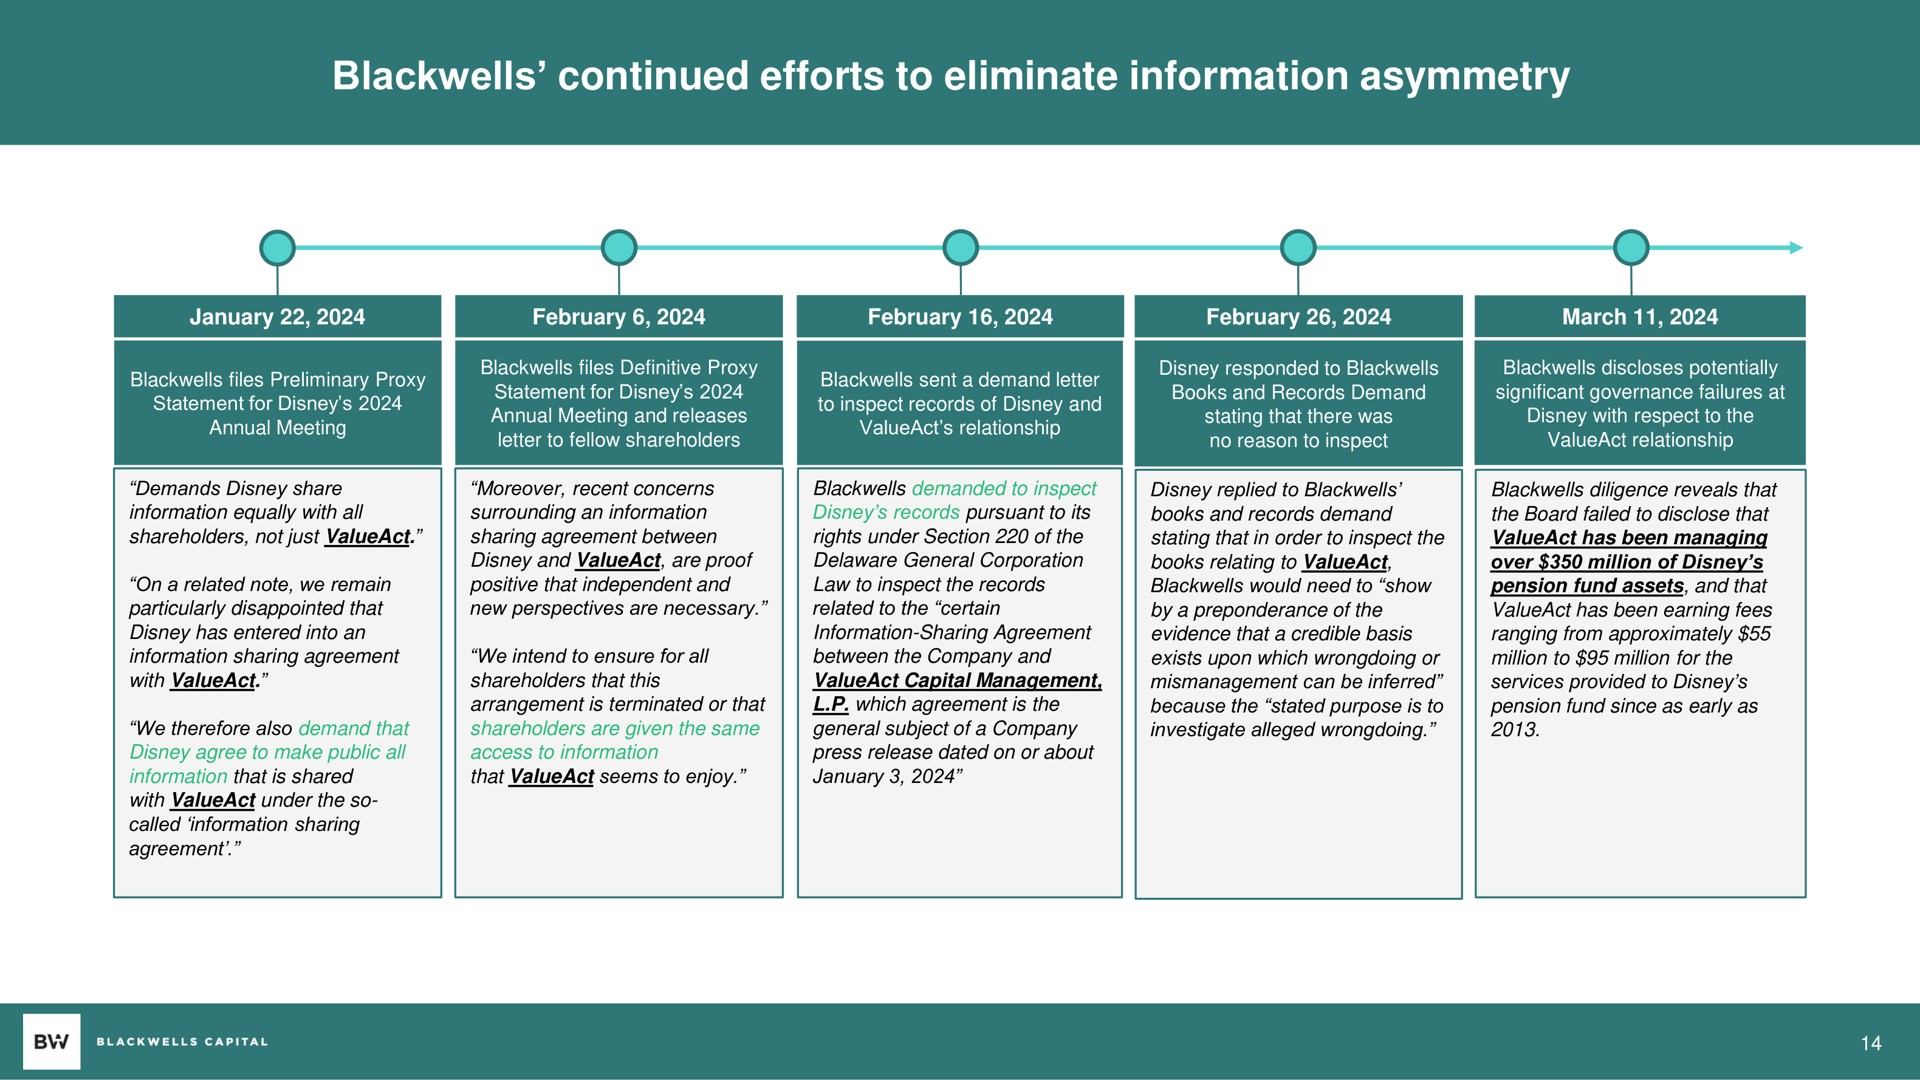 continued efforts to eliminate information asymmetry | Blackwells Capital